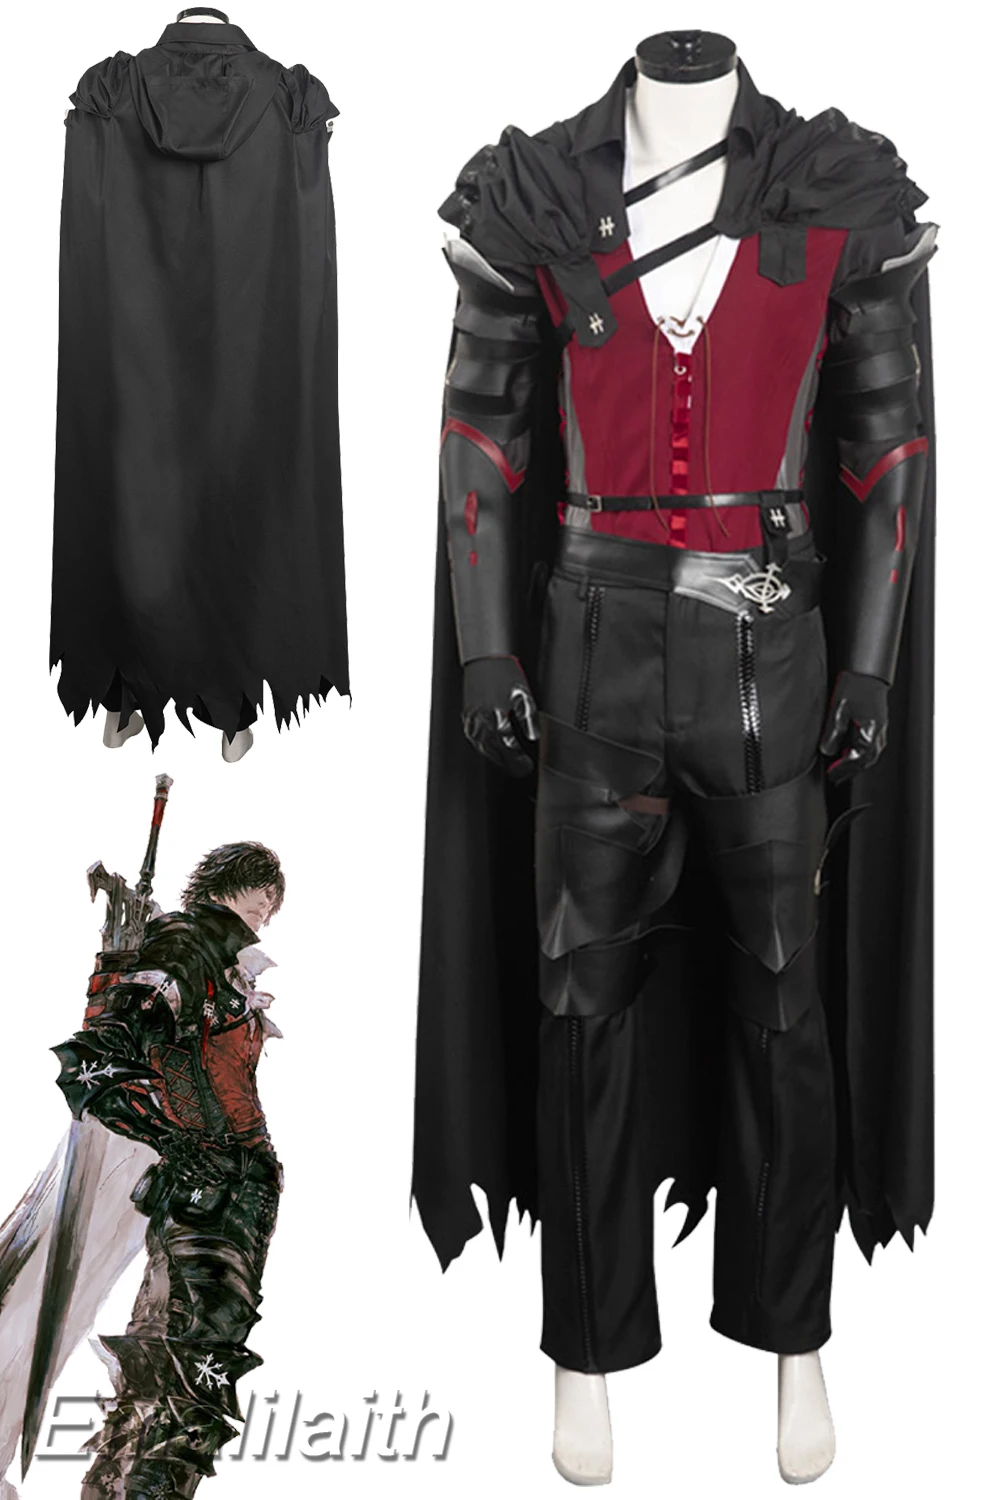 

FF16 Clive Rosfield Cosplay Role Play Black Cloak Suit Anime Game Final Fantasy XVI Costume Adult Men Fancy Dress Up Outfits